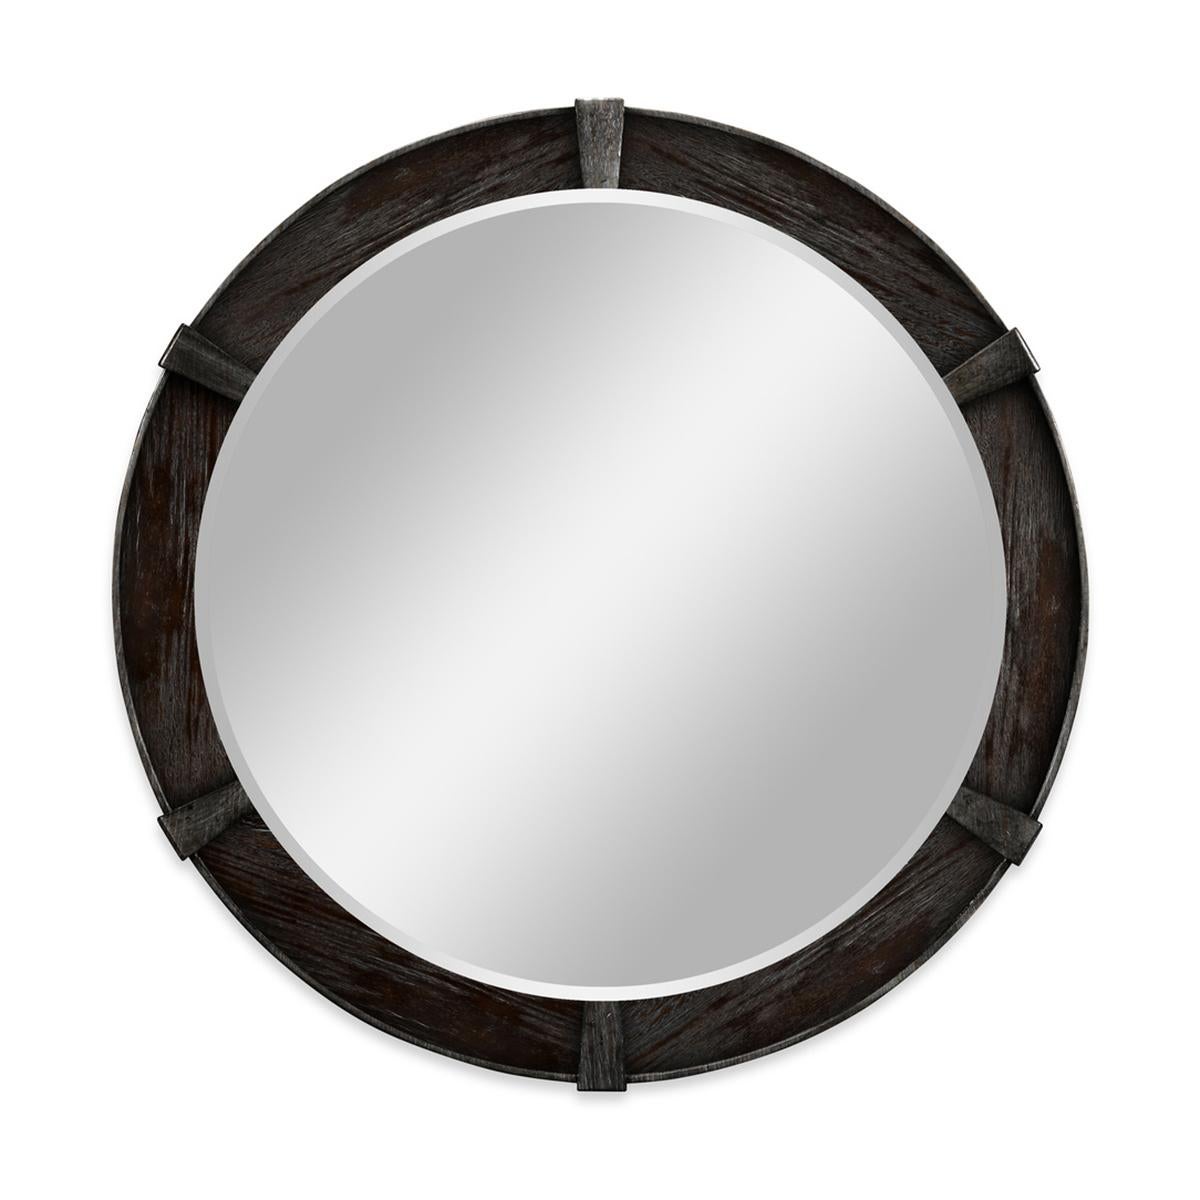 Modern Dark Ale round mirror, the small circular mirror in a dark finish with contemporary relief carved detail and a plain beveled mirror glass.

Dimensions: 35 7/8